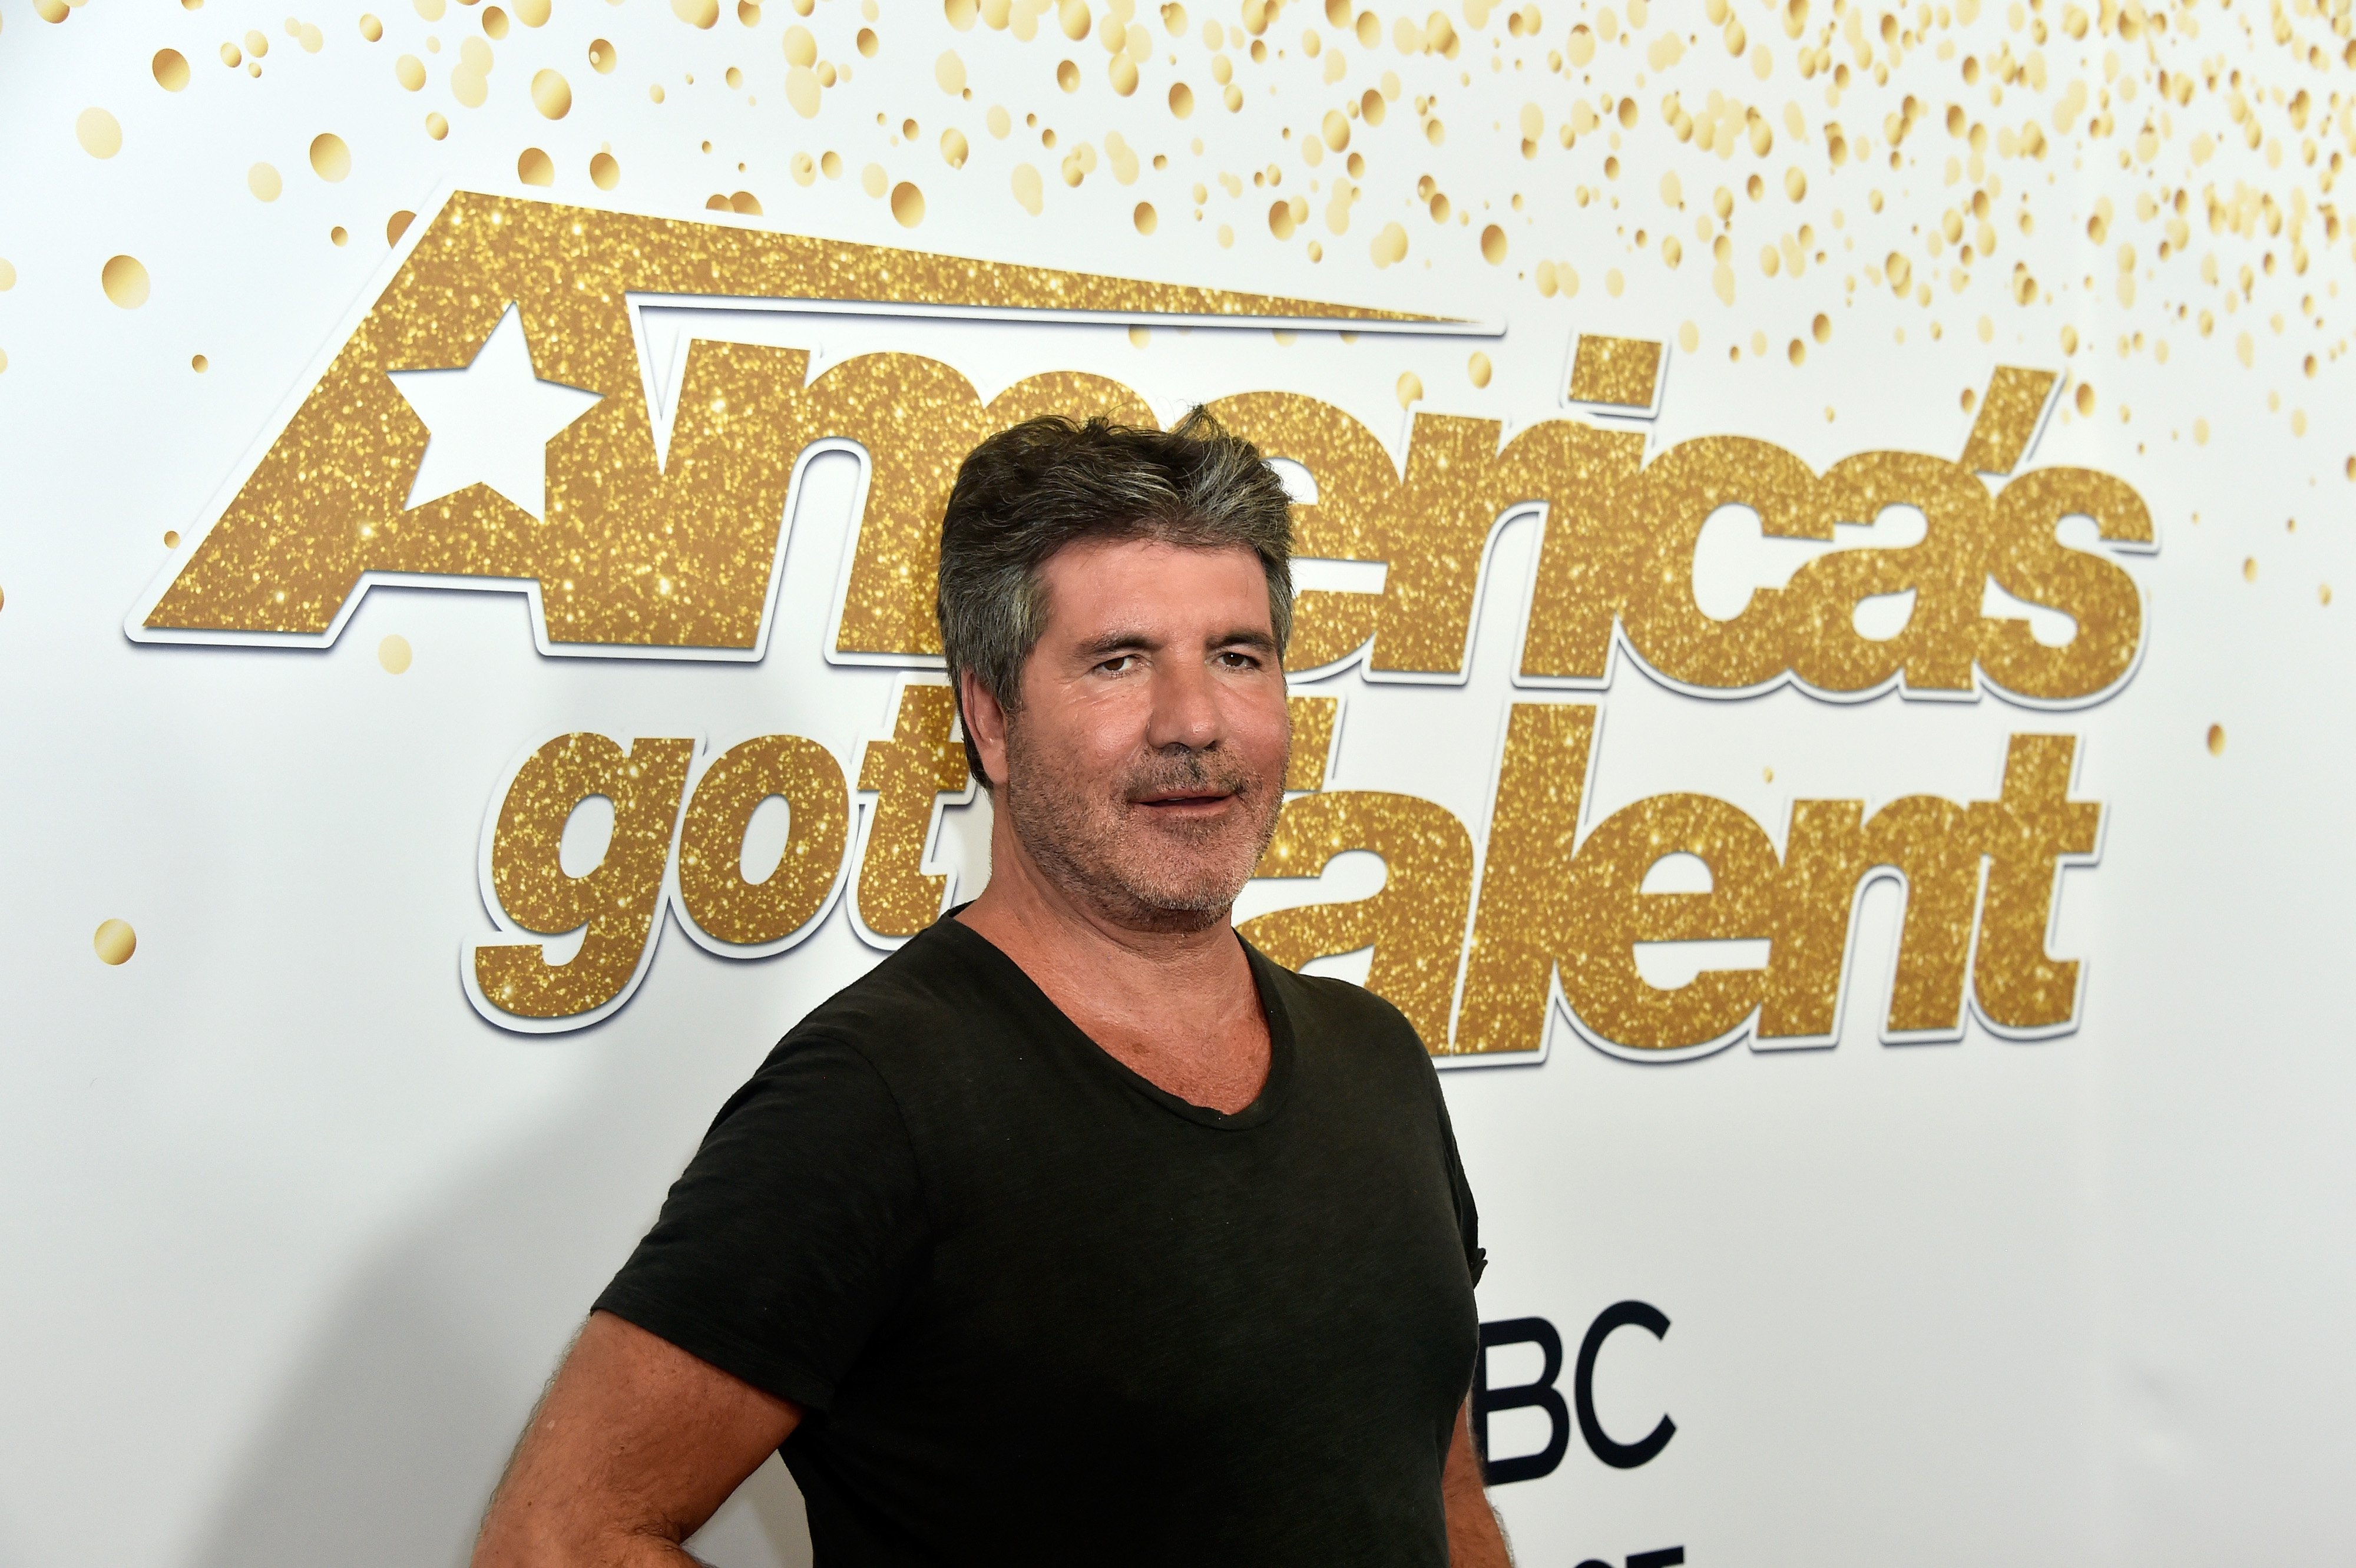 Simon Cowell attends the "America's Got Talent" Season 13 Live Show at Dolby Theatre on August 14, 2018, in Hollywood, California. | Source: Getty Images